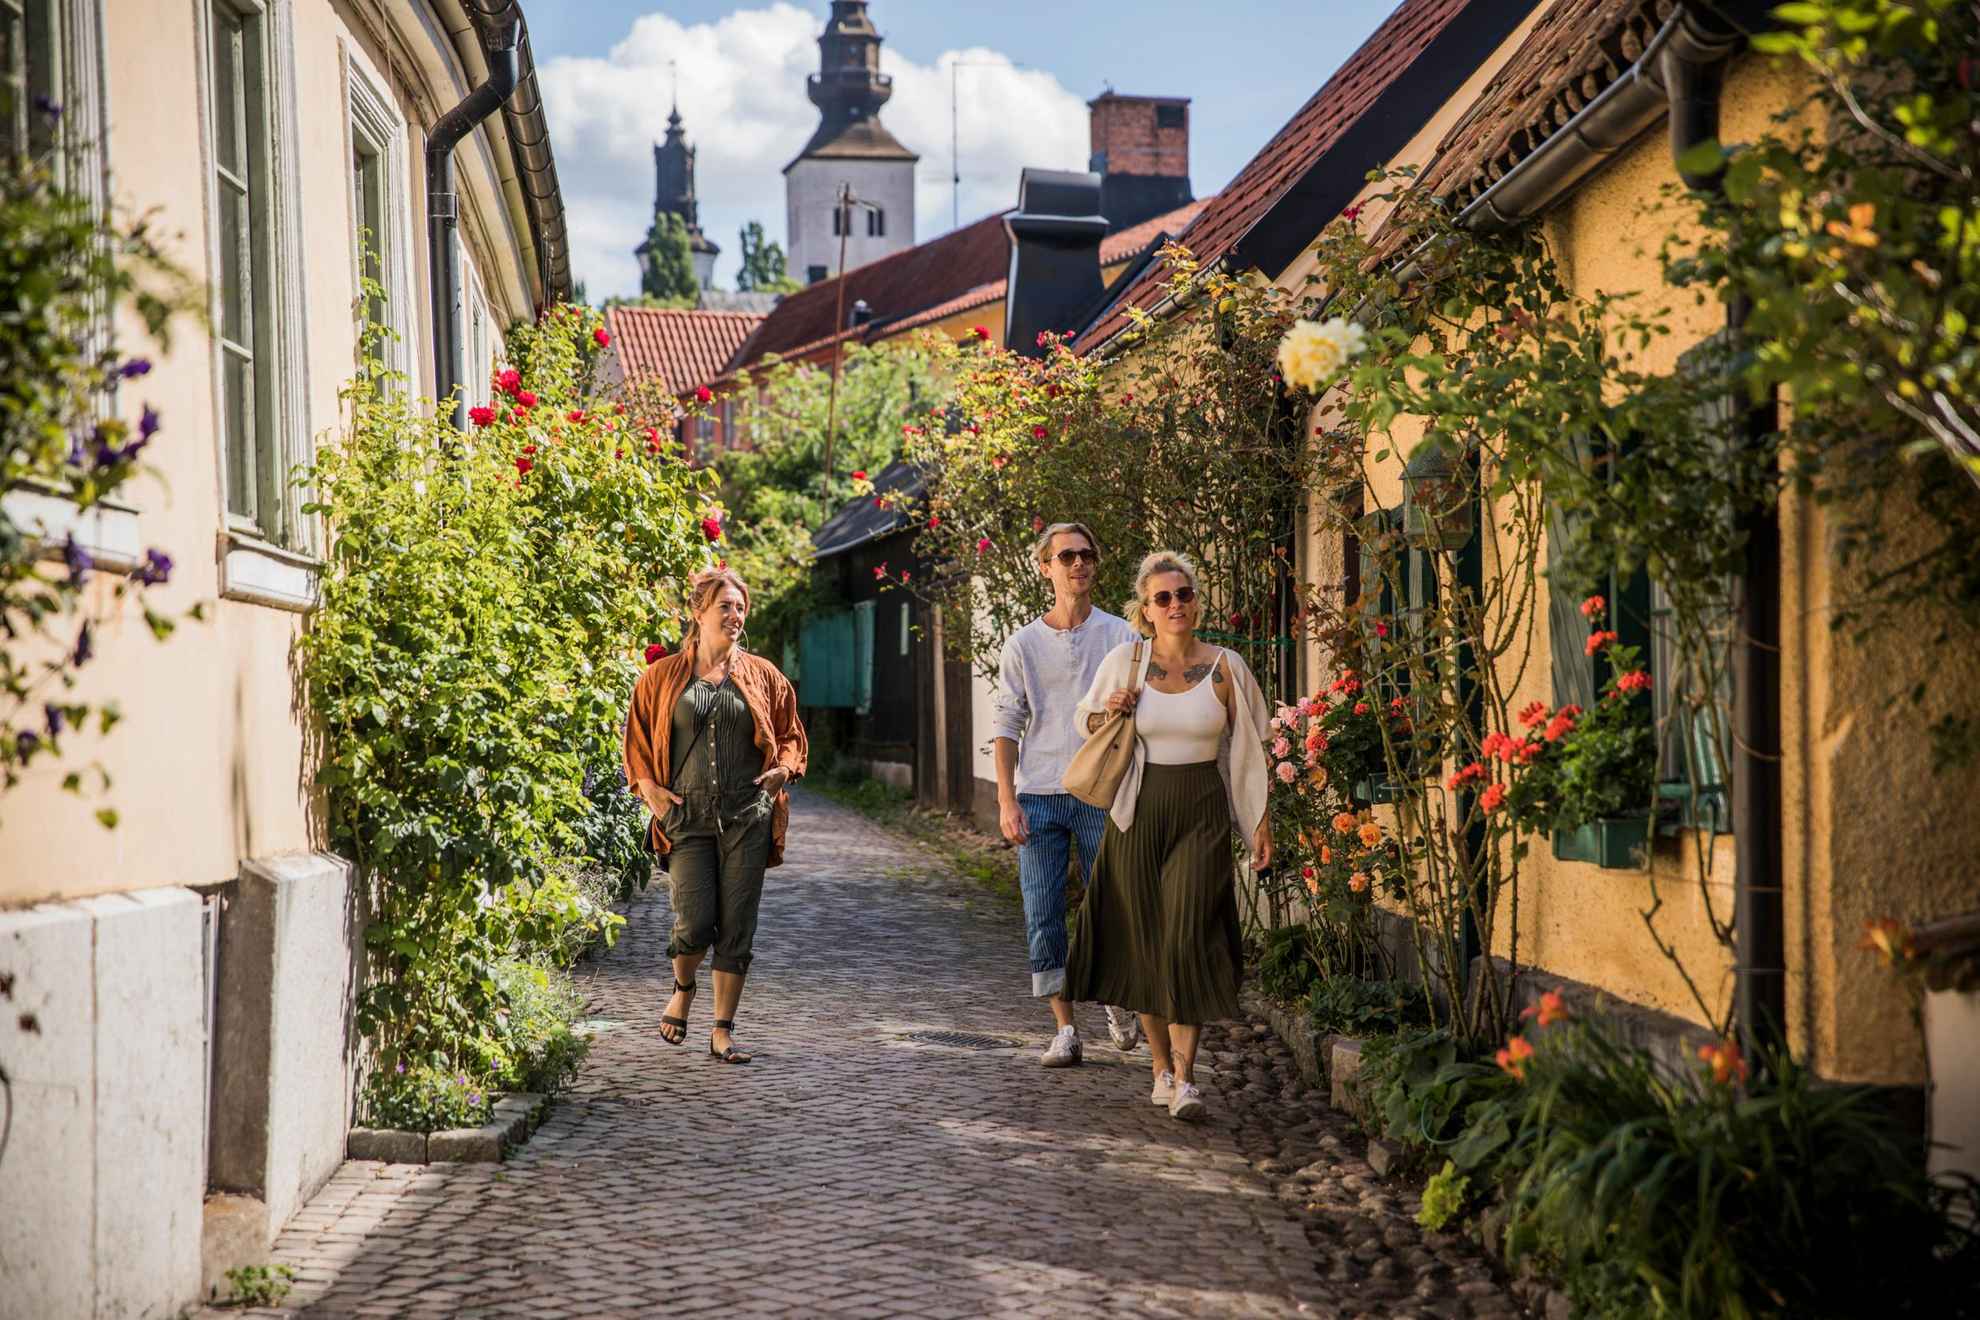 A man and two women strolling down a small cobblestone street in Visby. Flowers are growing in front of the old houses.